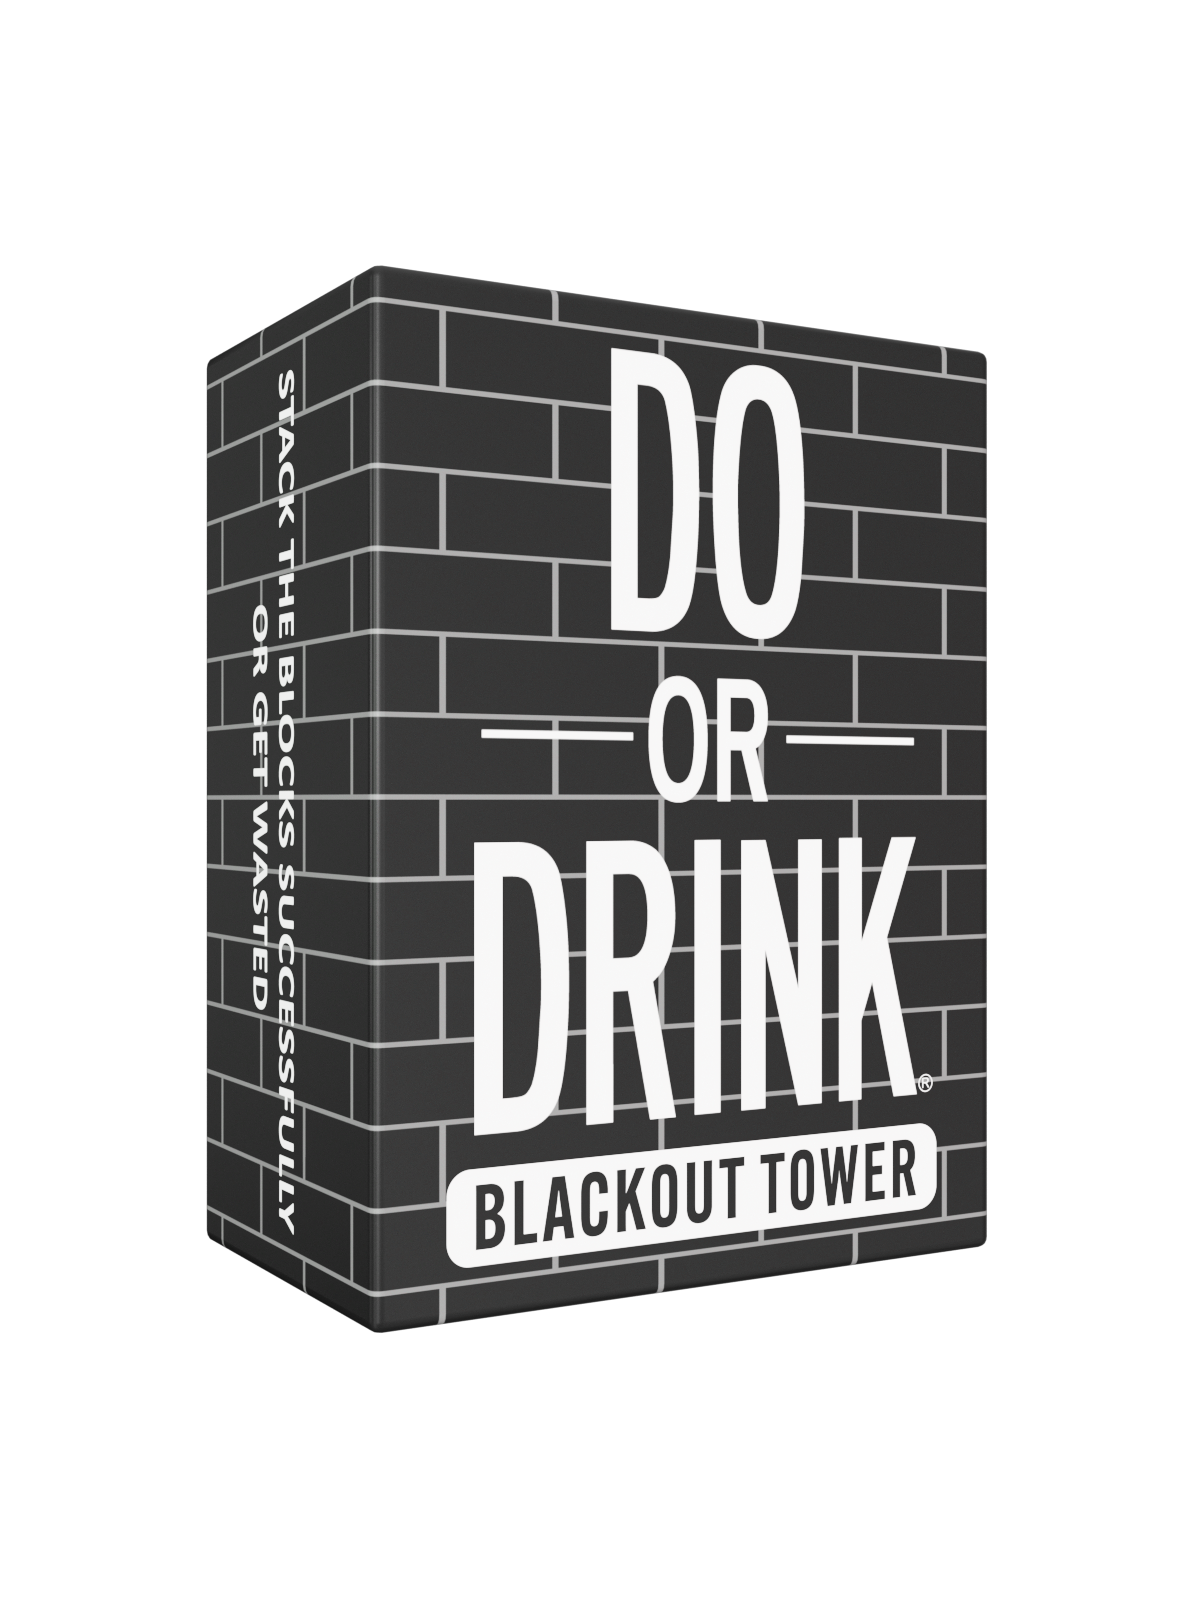 Blackout Tower